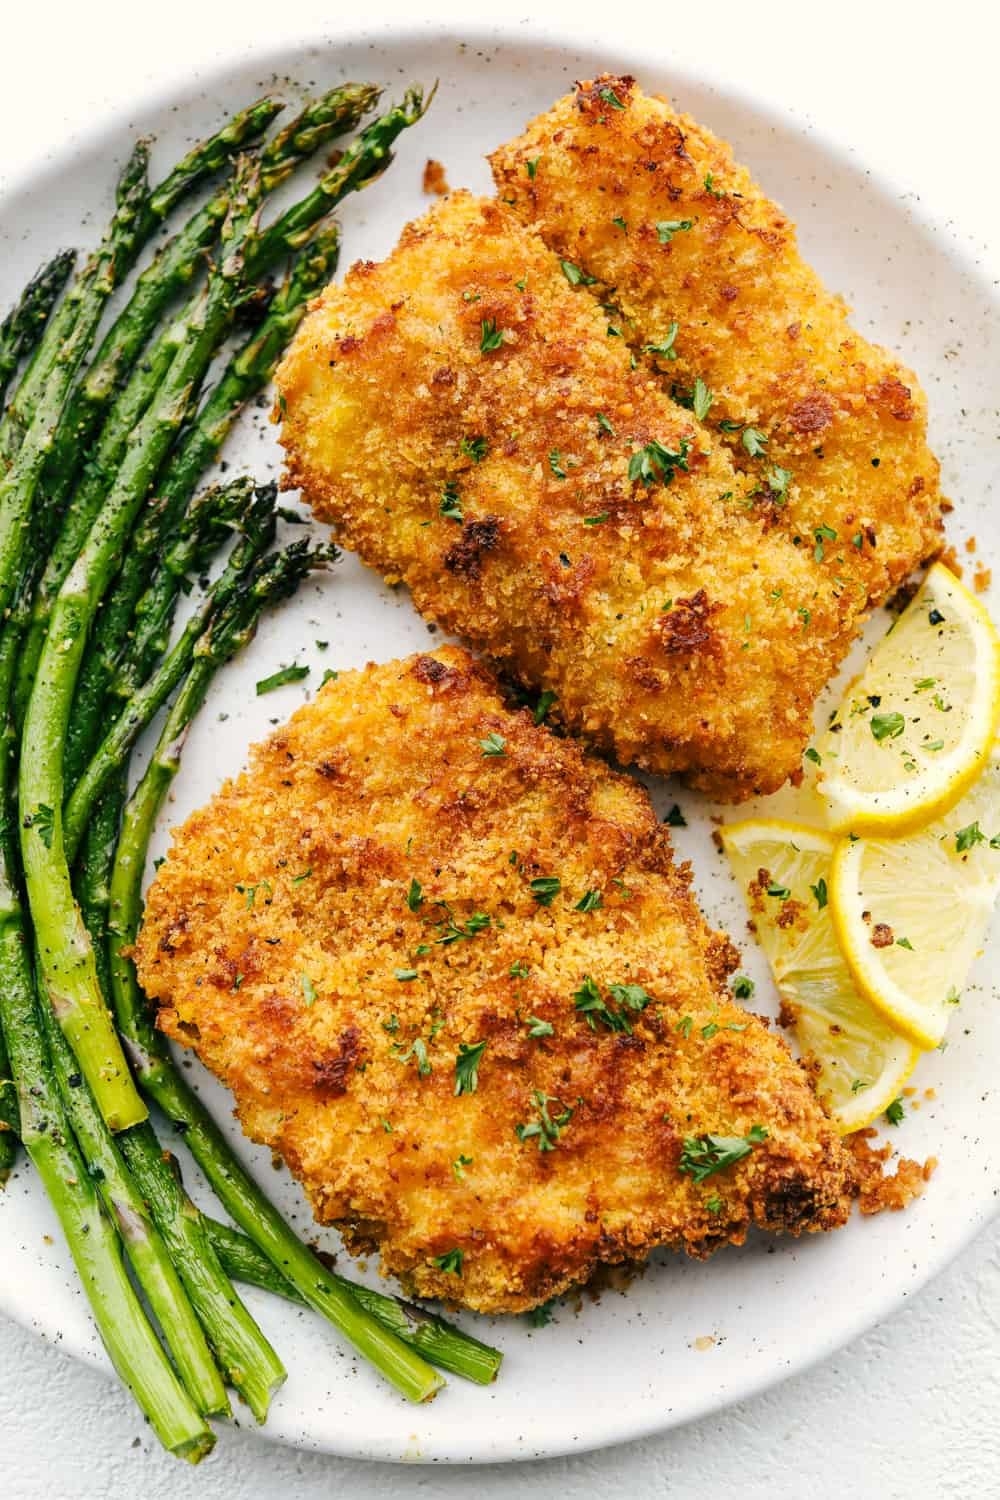 Two pieces of breaded cod with asparagus and lemon slices.